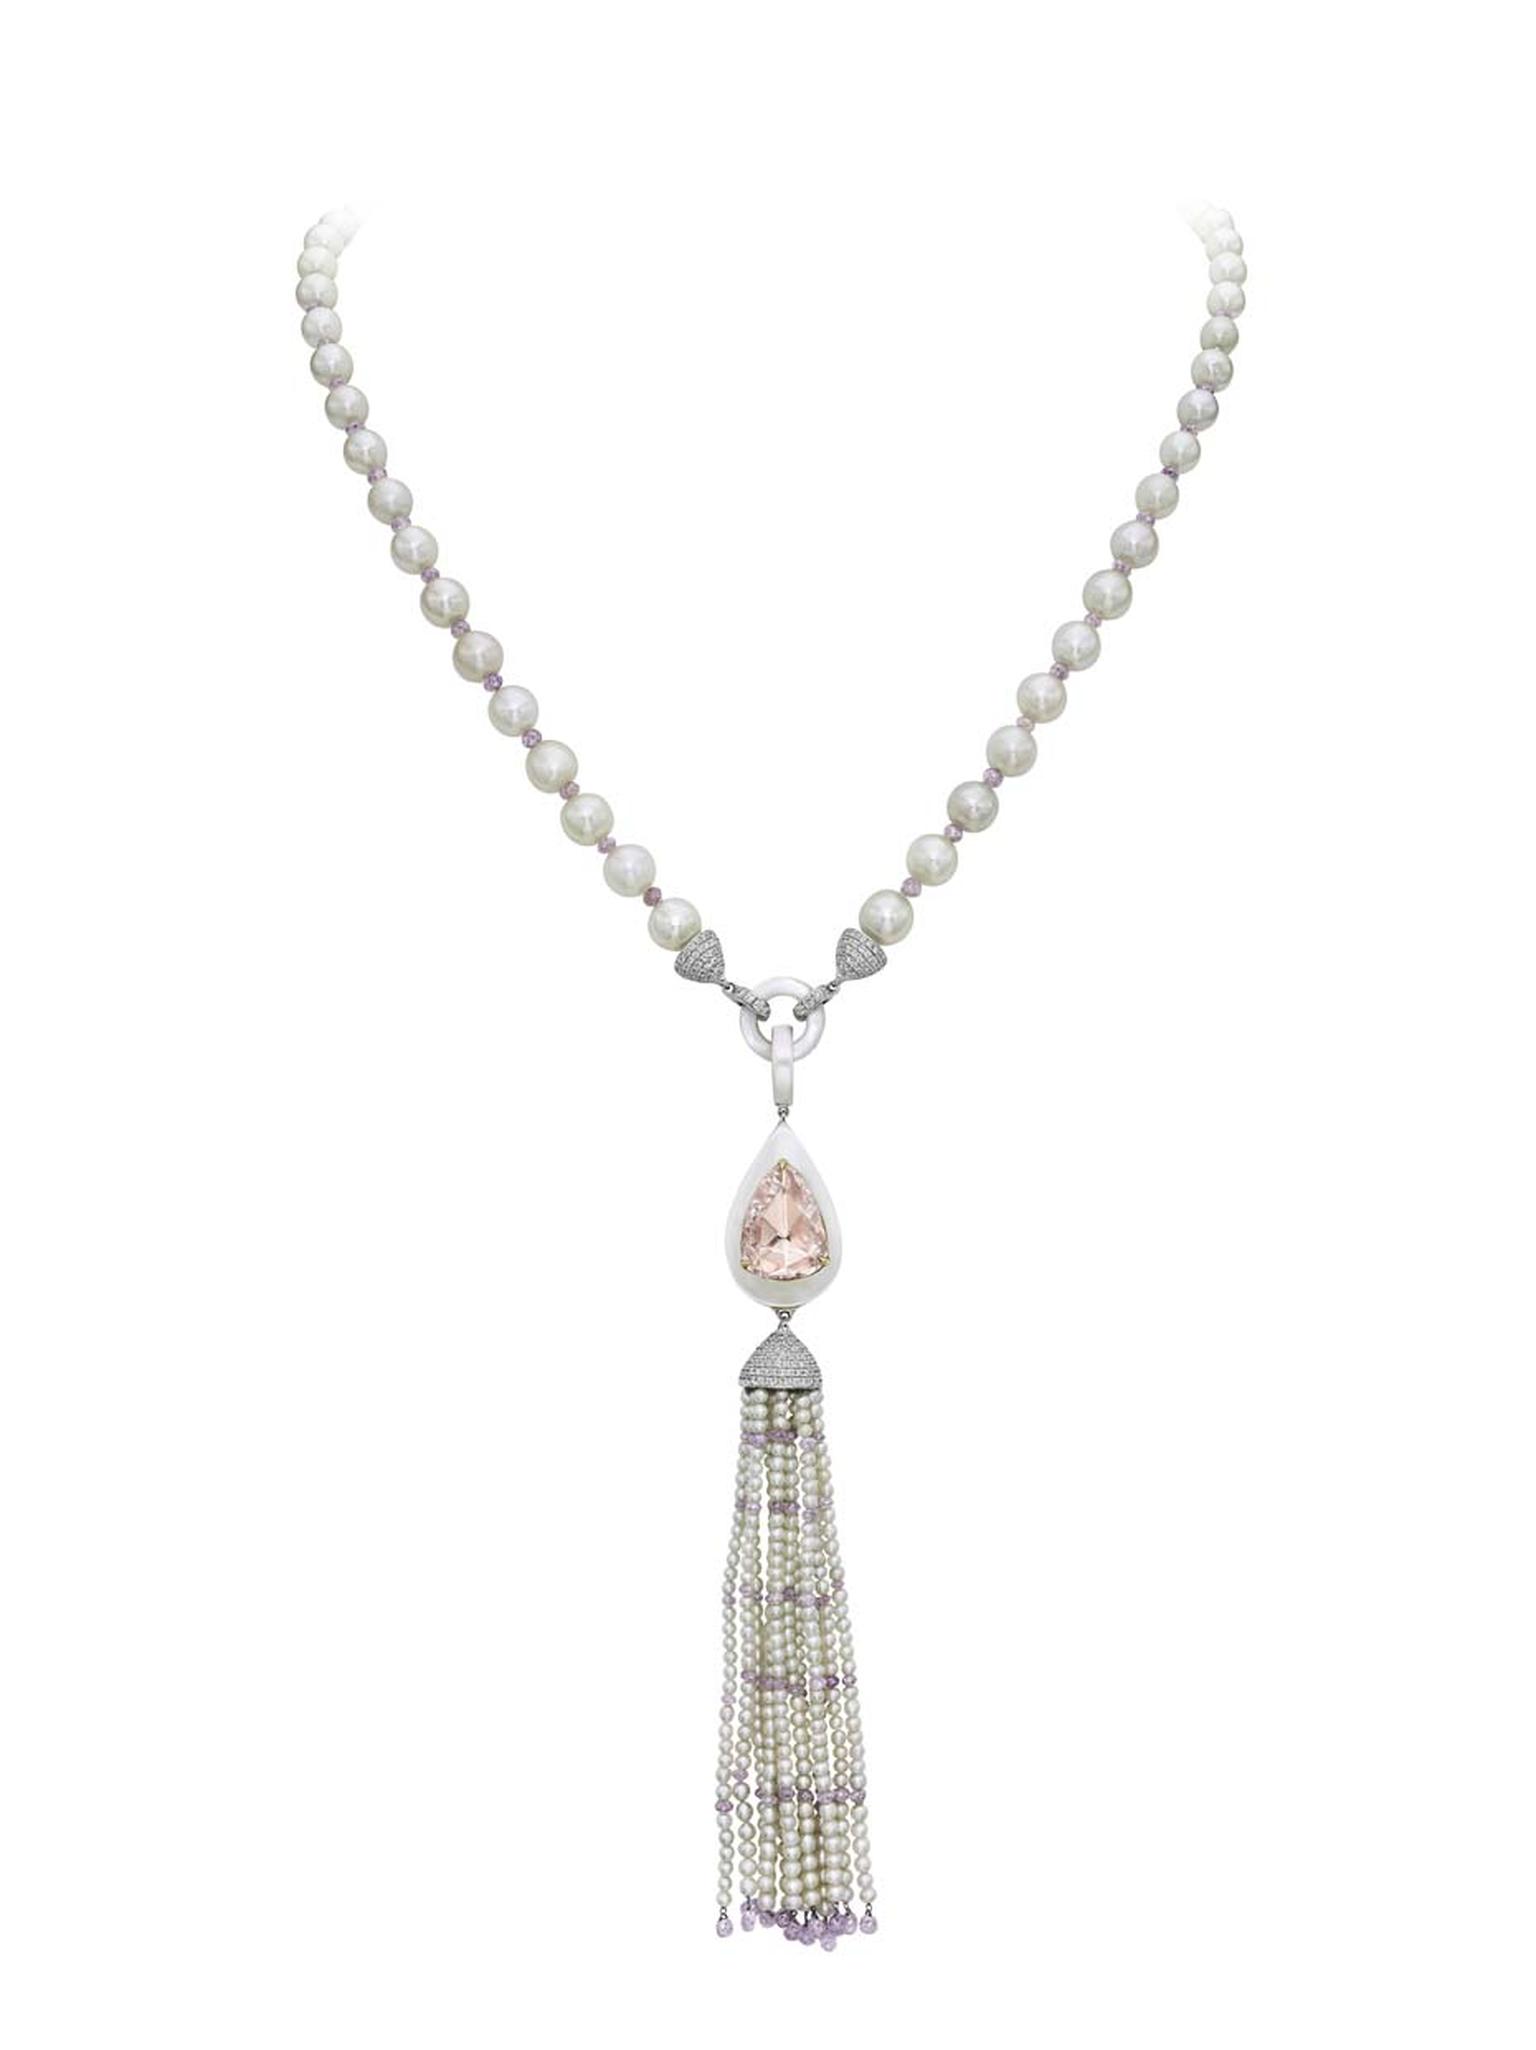 The Genevan high jewellery house Boghossian is exhibiting this stunning tassel necklace featuring a 5.00ct. pink diamond inlaid into mother-of-pearl, a necklace of natural saltwater pearls and briolette-cut pink diamonds with seed pearls on the tassels.